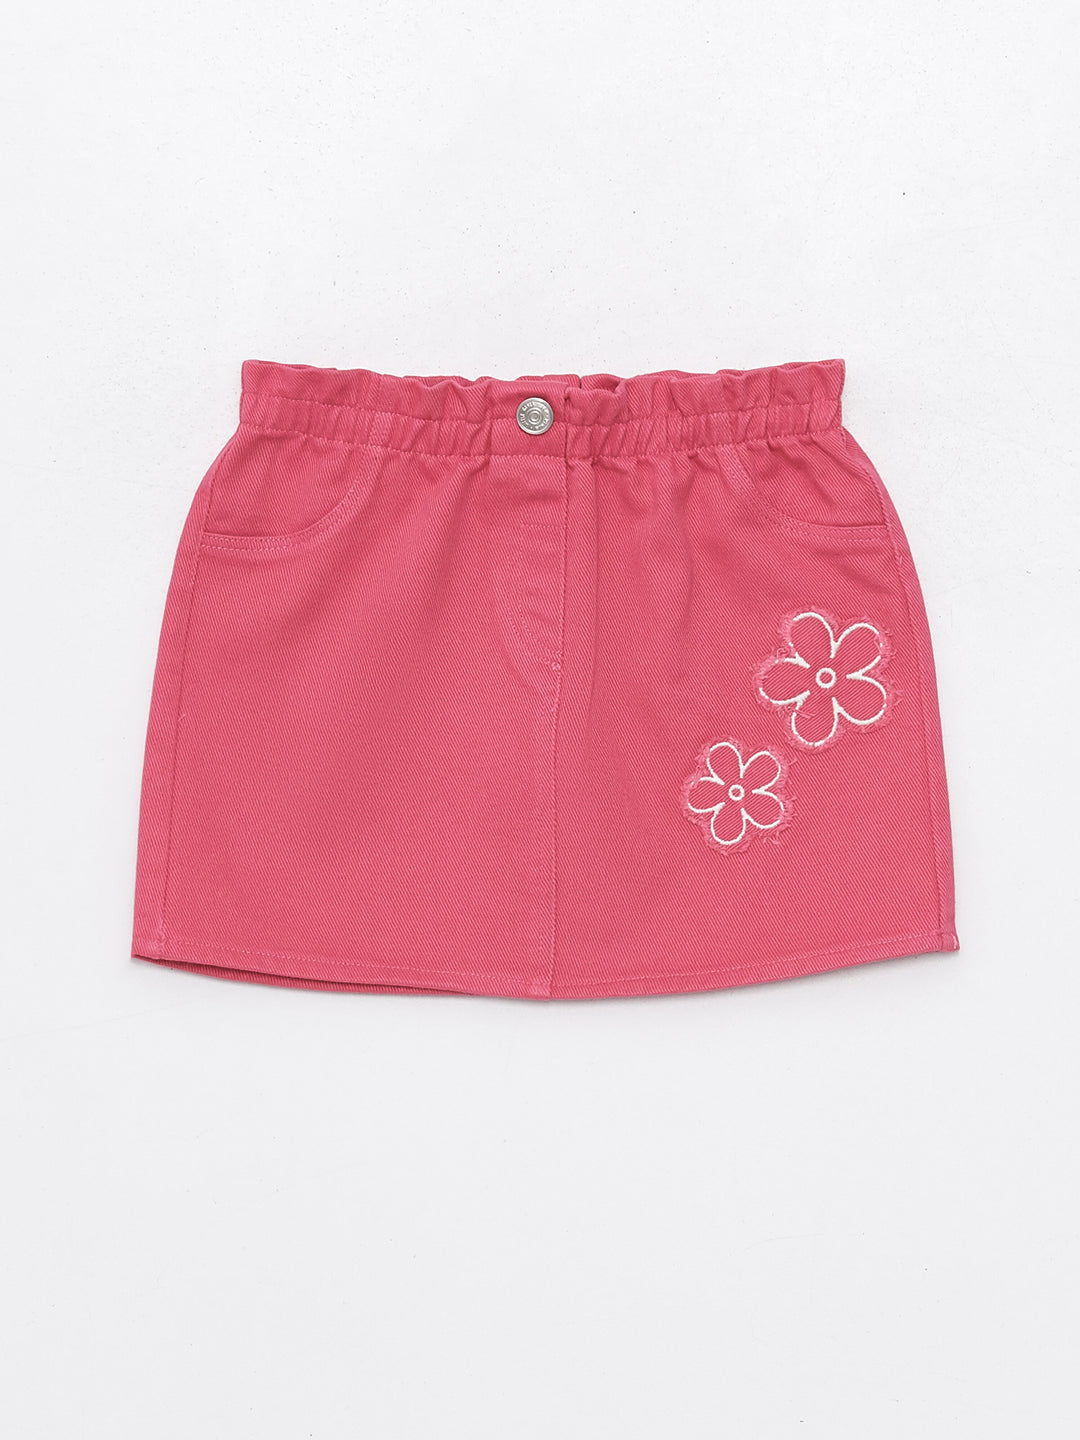 Floral Baby Girl Skirt with Elastic Waist